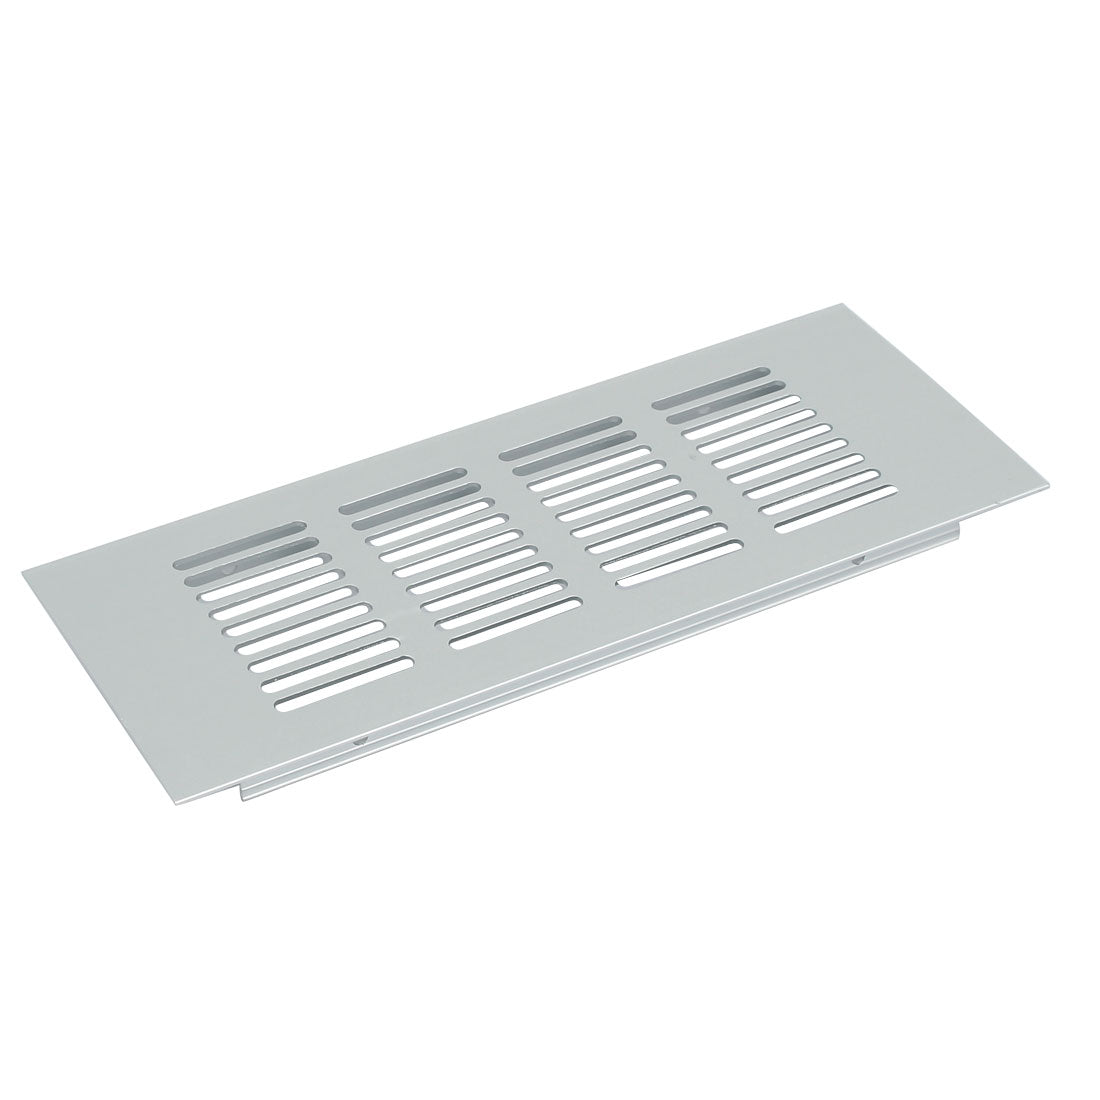 uxcell Uxcell Aluminum Alloy Air Vent Louvered Grill Cover Ventilation Grille 200mmx80mm